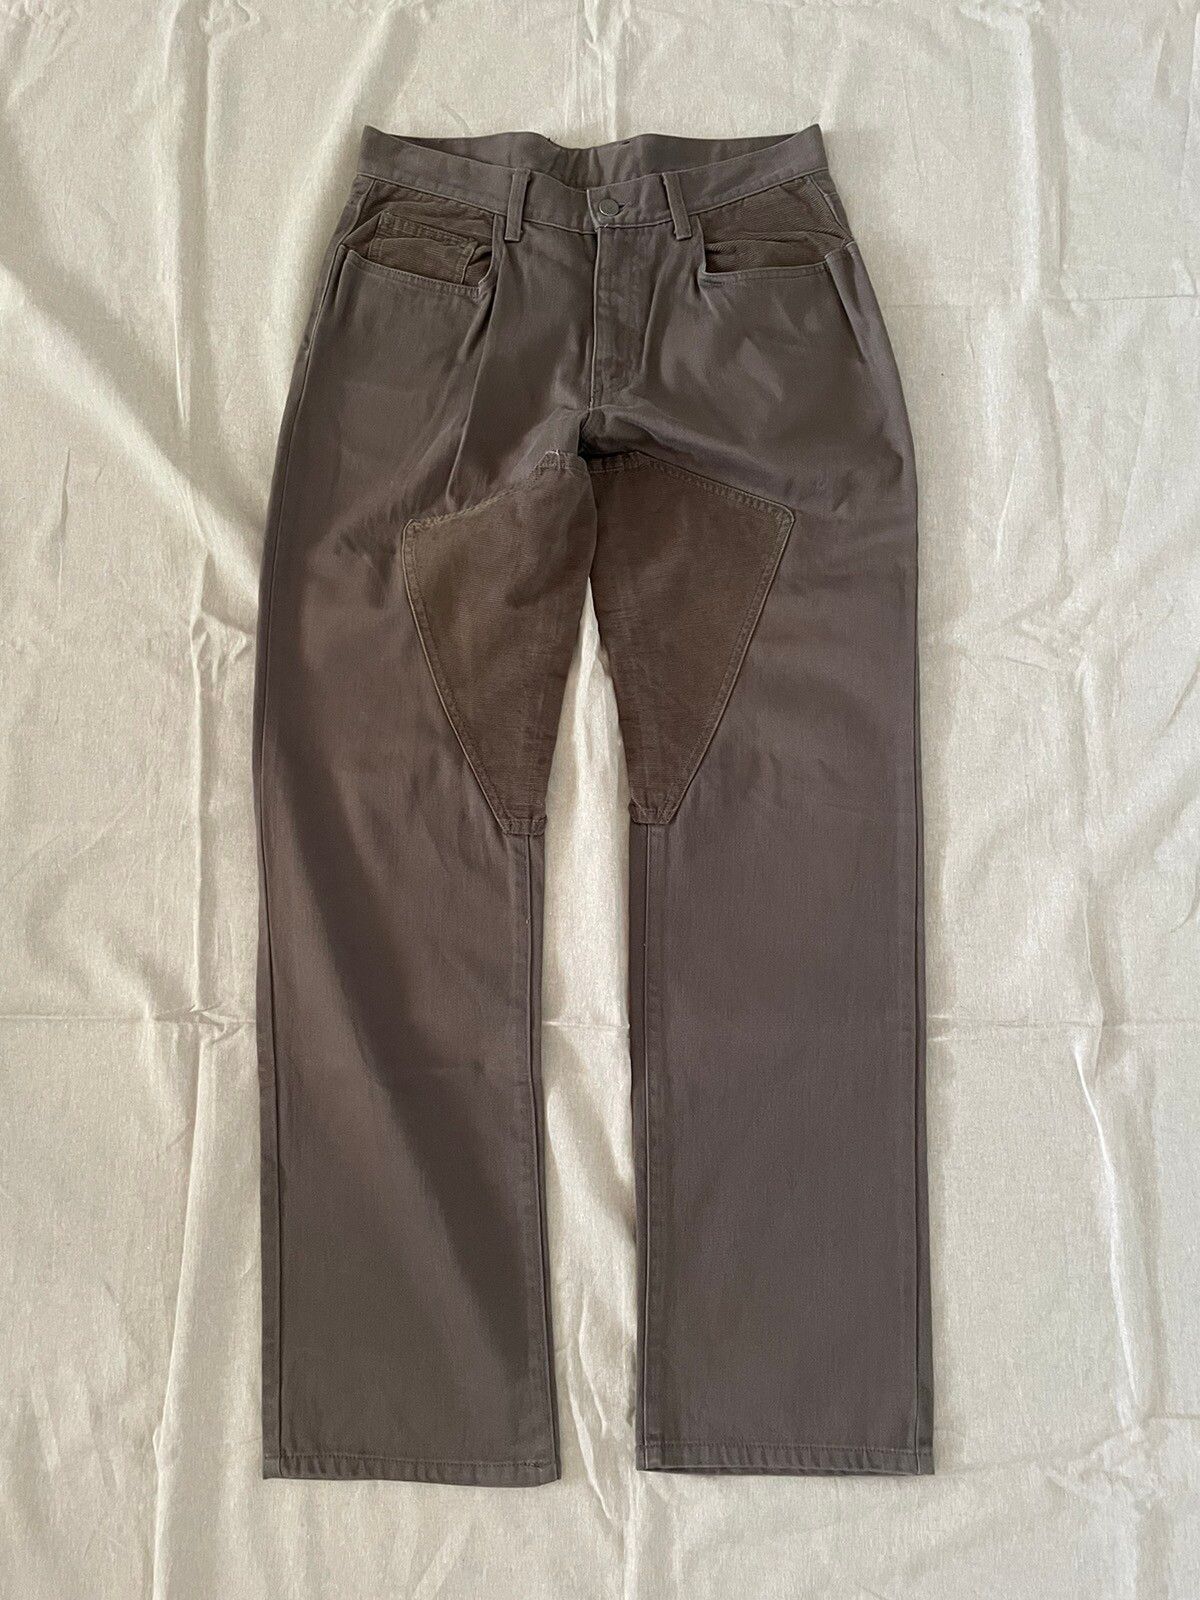 General Research General Research Gusset Trousers | Grailed